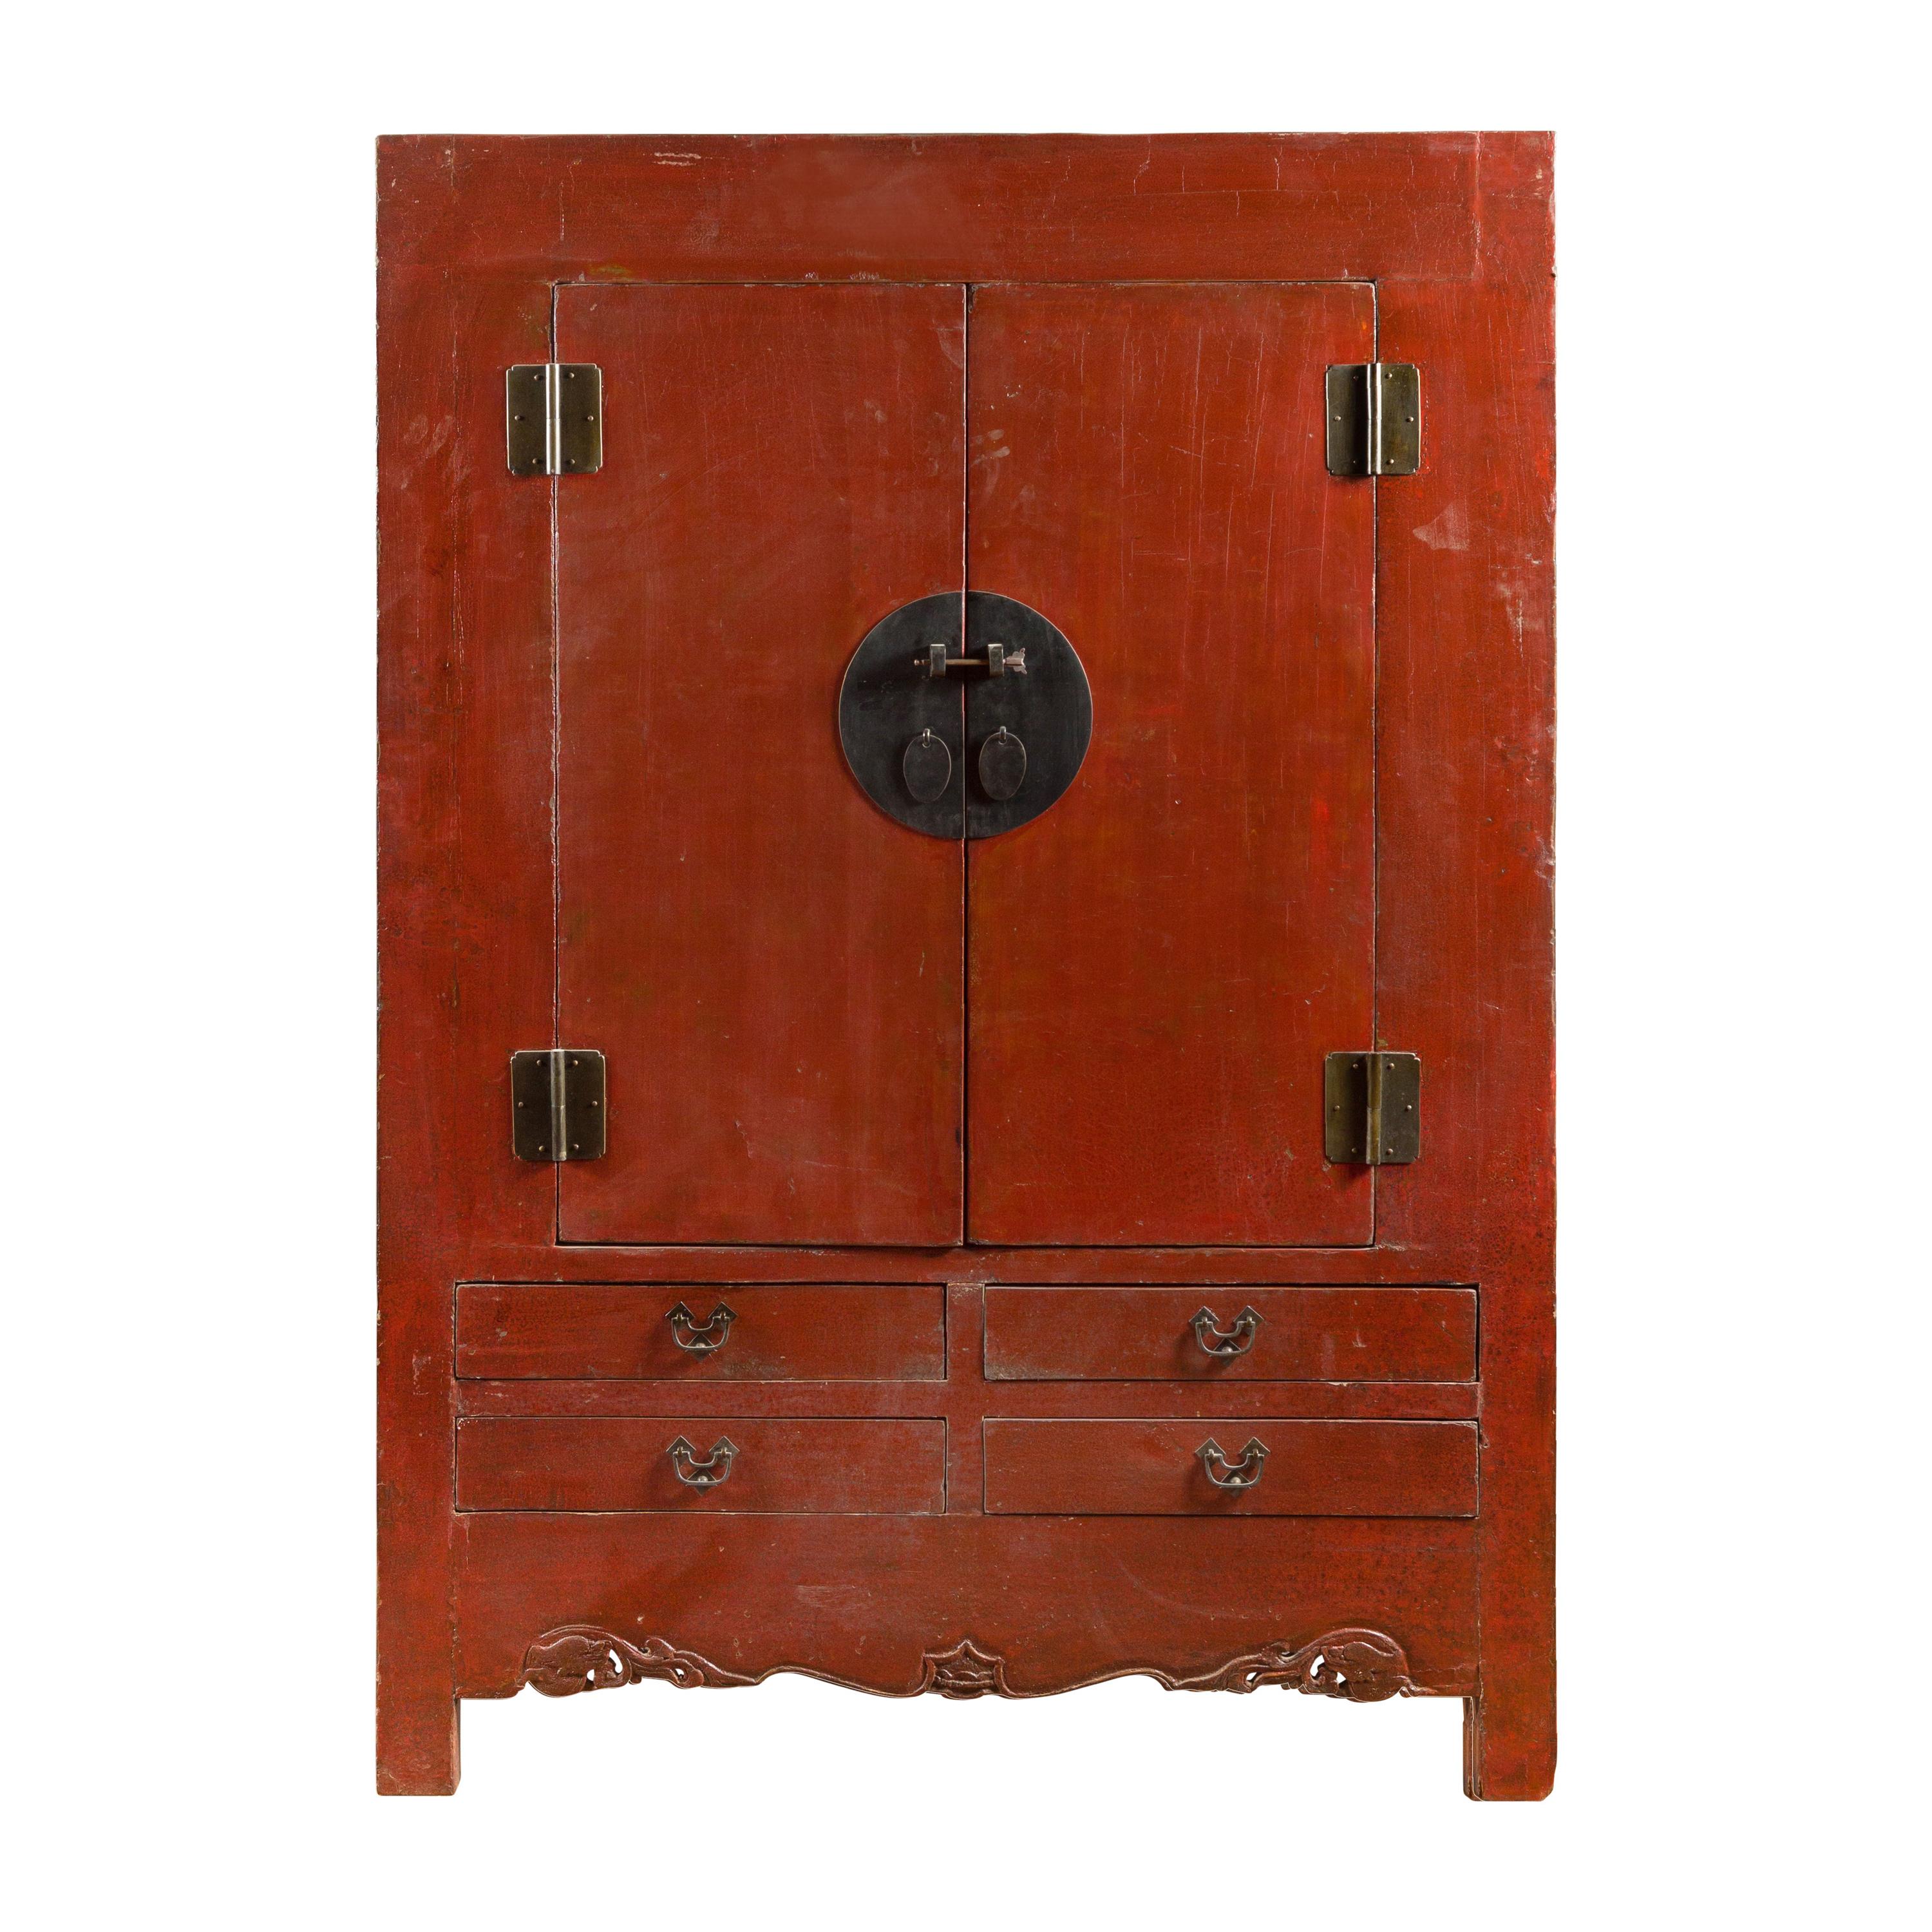 Chinese 19th Century Qing Dynasty Red Lacquer Cabinet with Medallion Hardware For Sale